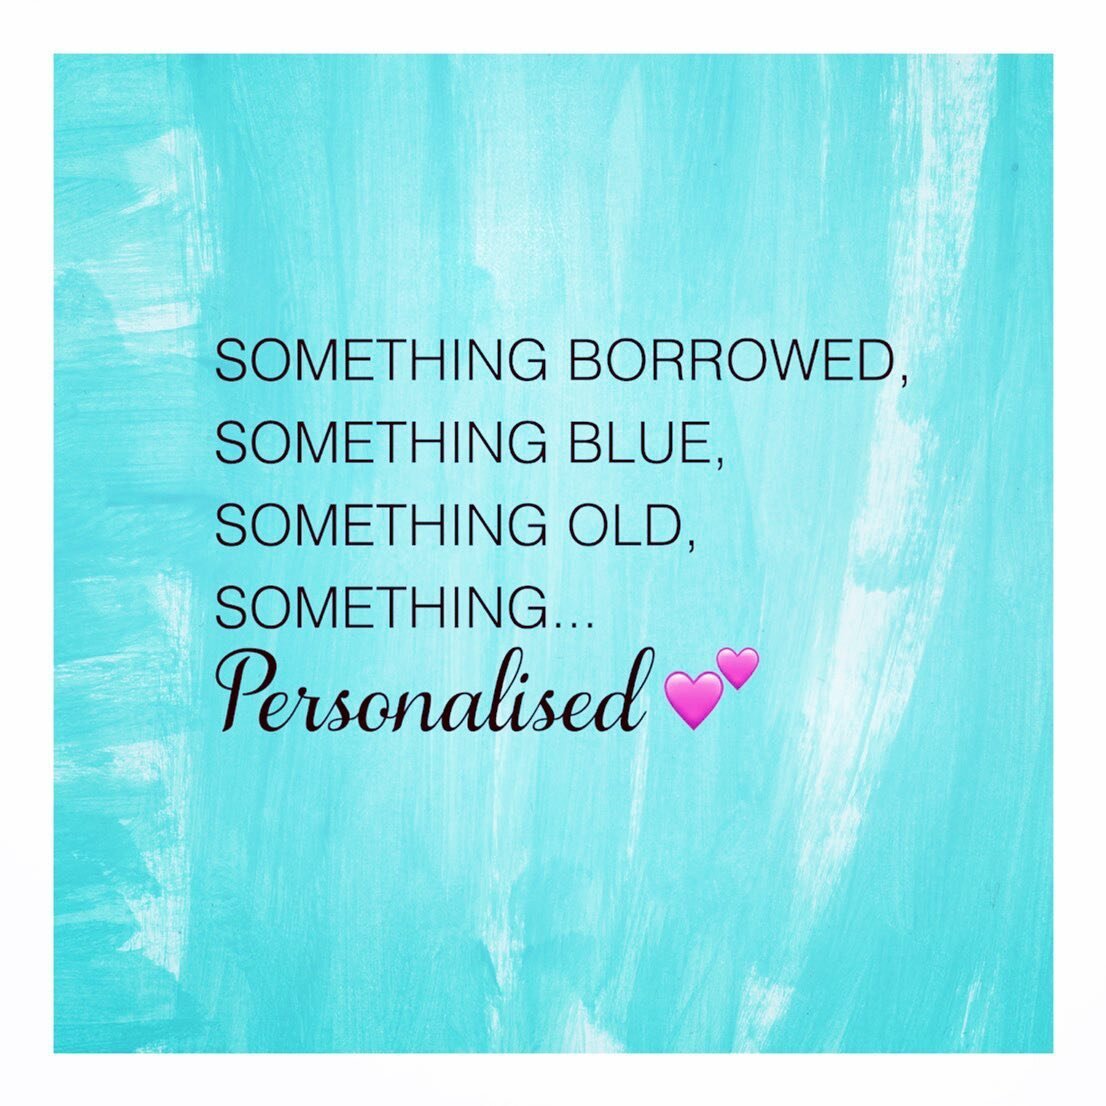 &lsquo;Something borrowed, something blue, something old, something...personalised. &lsquo; 💕

We deliver personalised memories. Everyone's story is unique and magical, and is bursting to be told. Personalised design also makes a beautiful gift and 